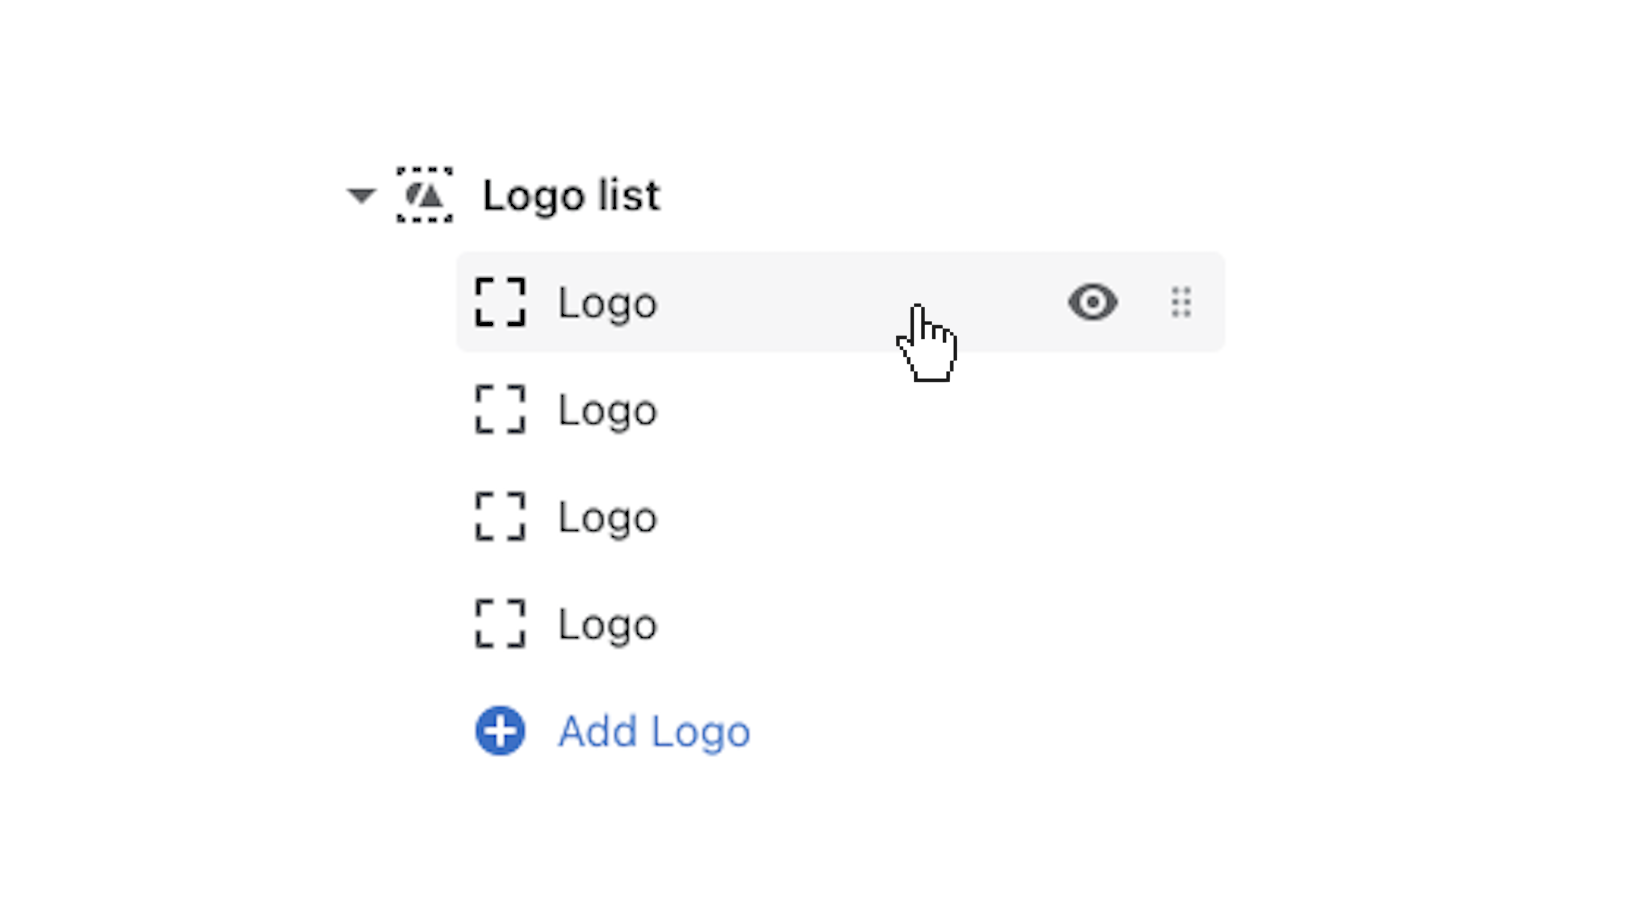 click_logo_list_section_to_open_block_settings.png